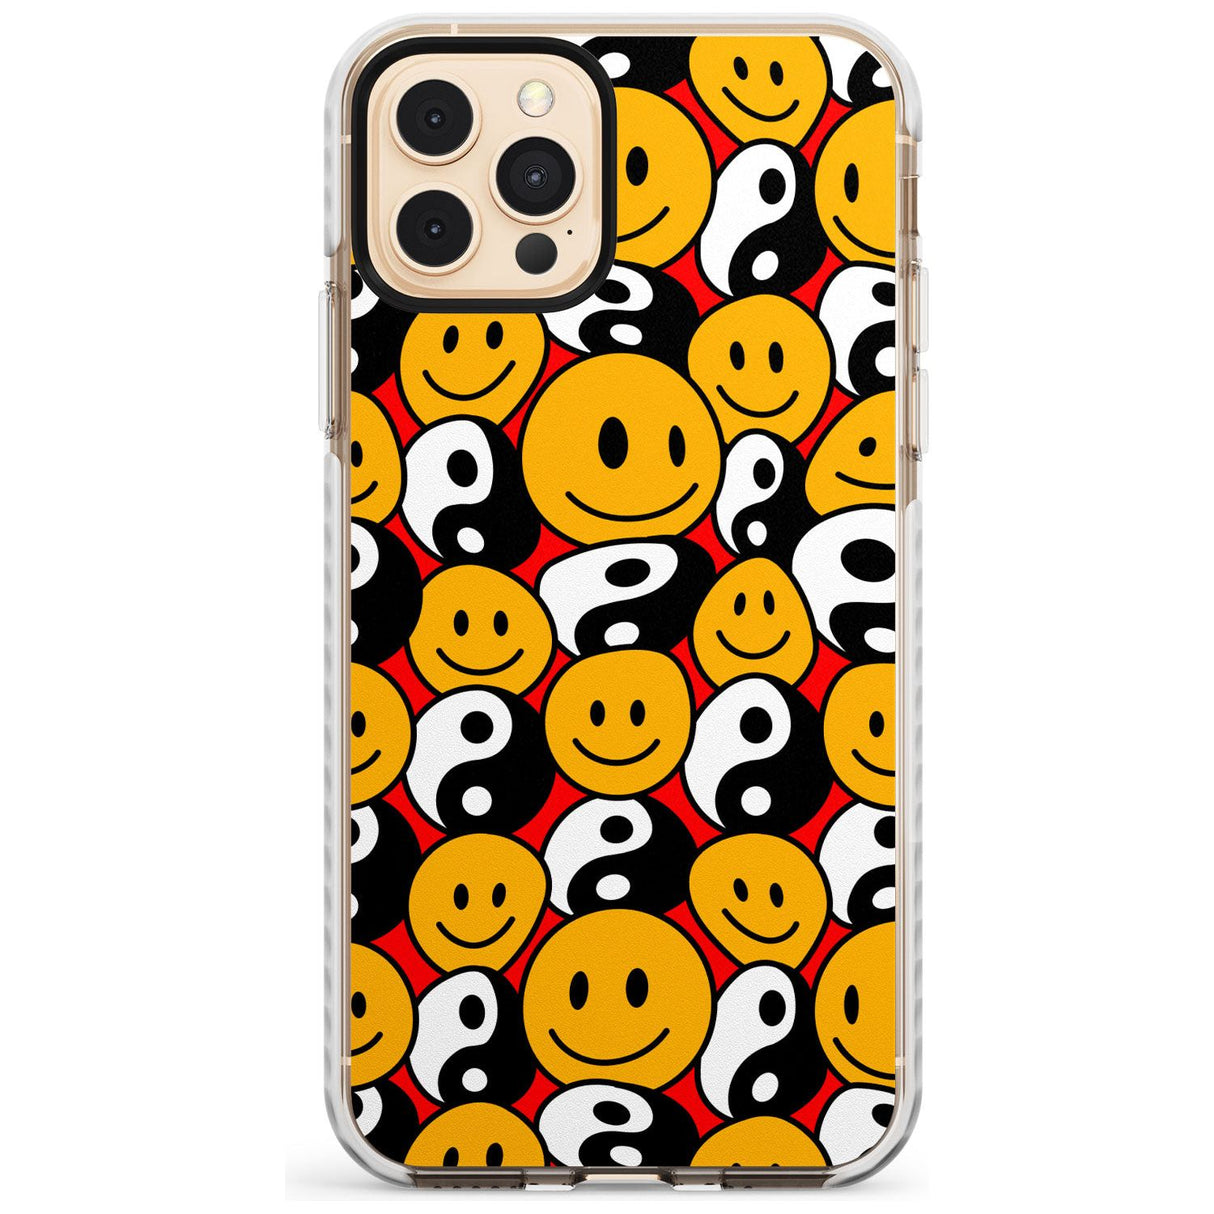 Yin Yang & Faces Impact Phone Case for iPhone 11 Pro Max